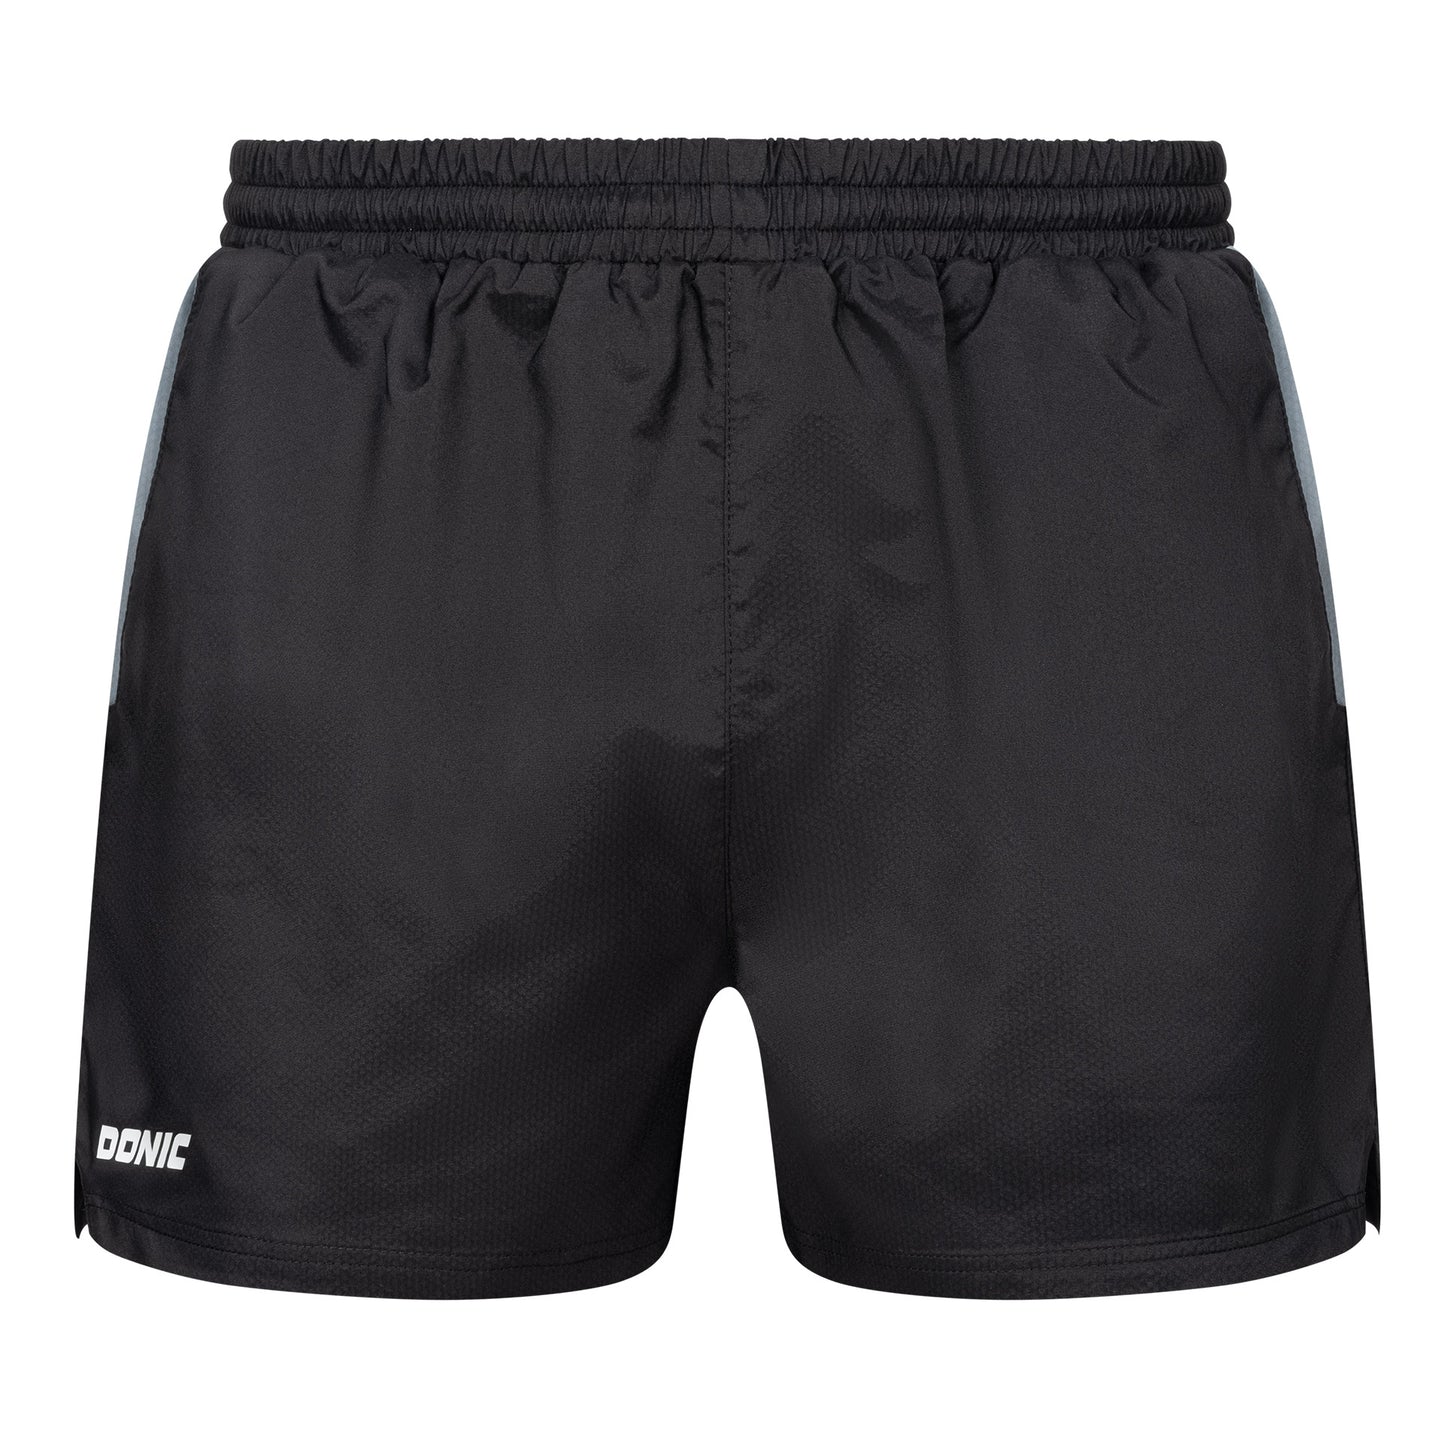 Donic Dive Shorts